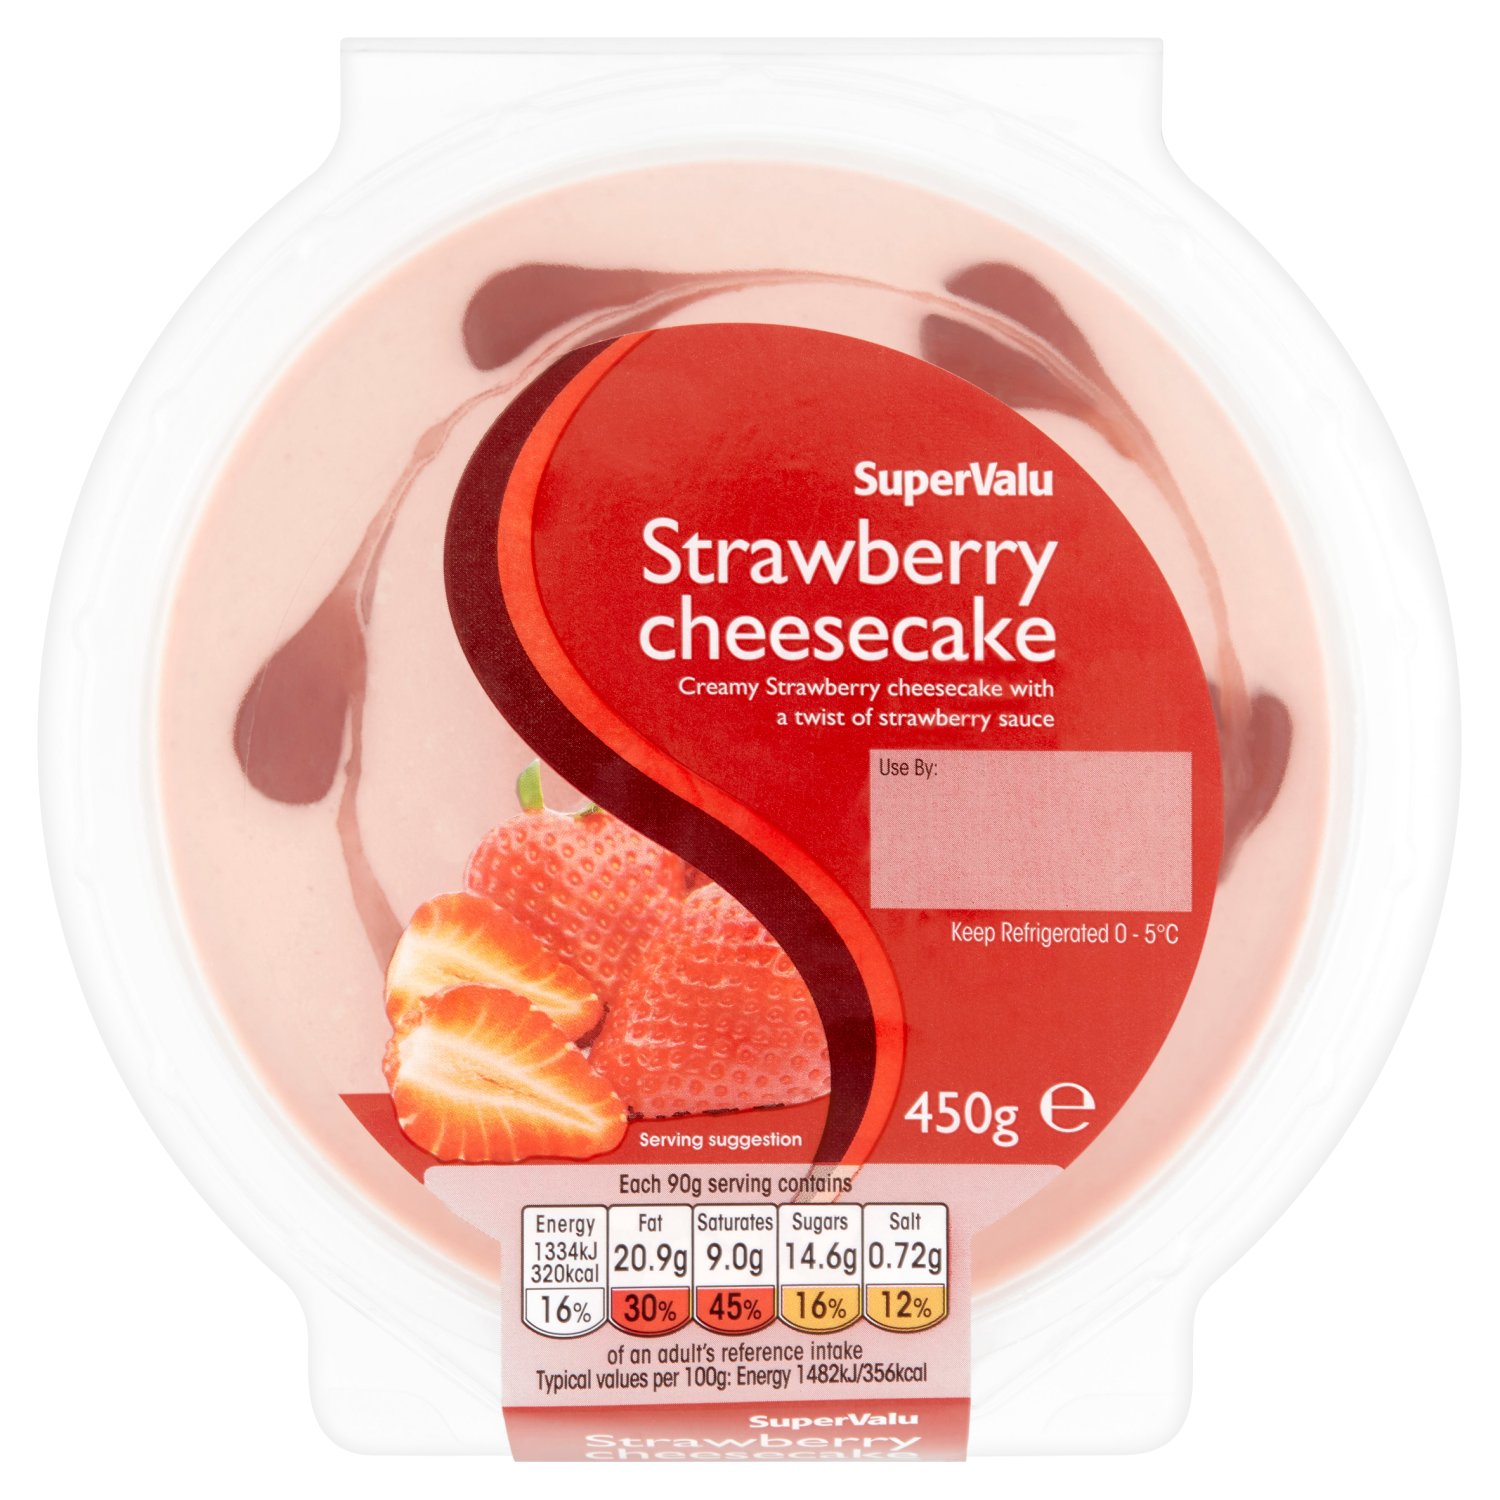 SuperValu Stawberry Cheesecake (450 g)